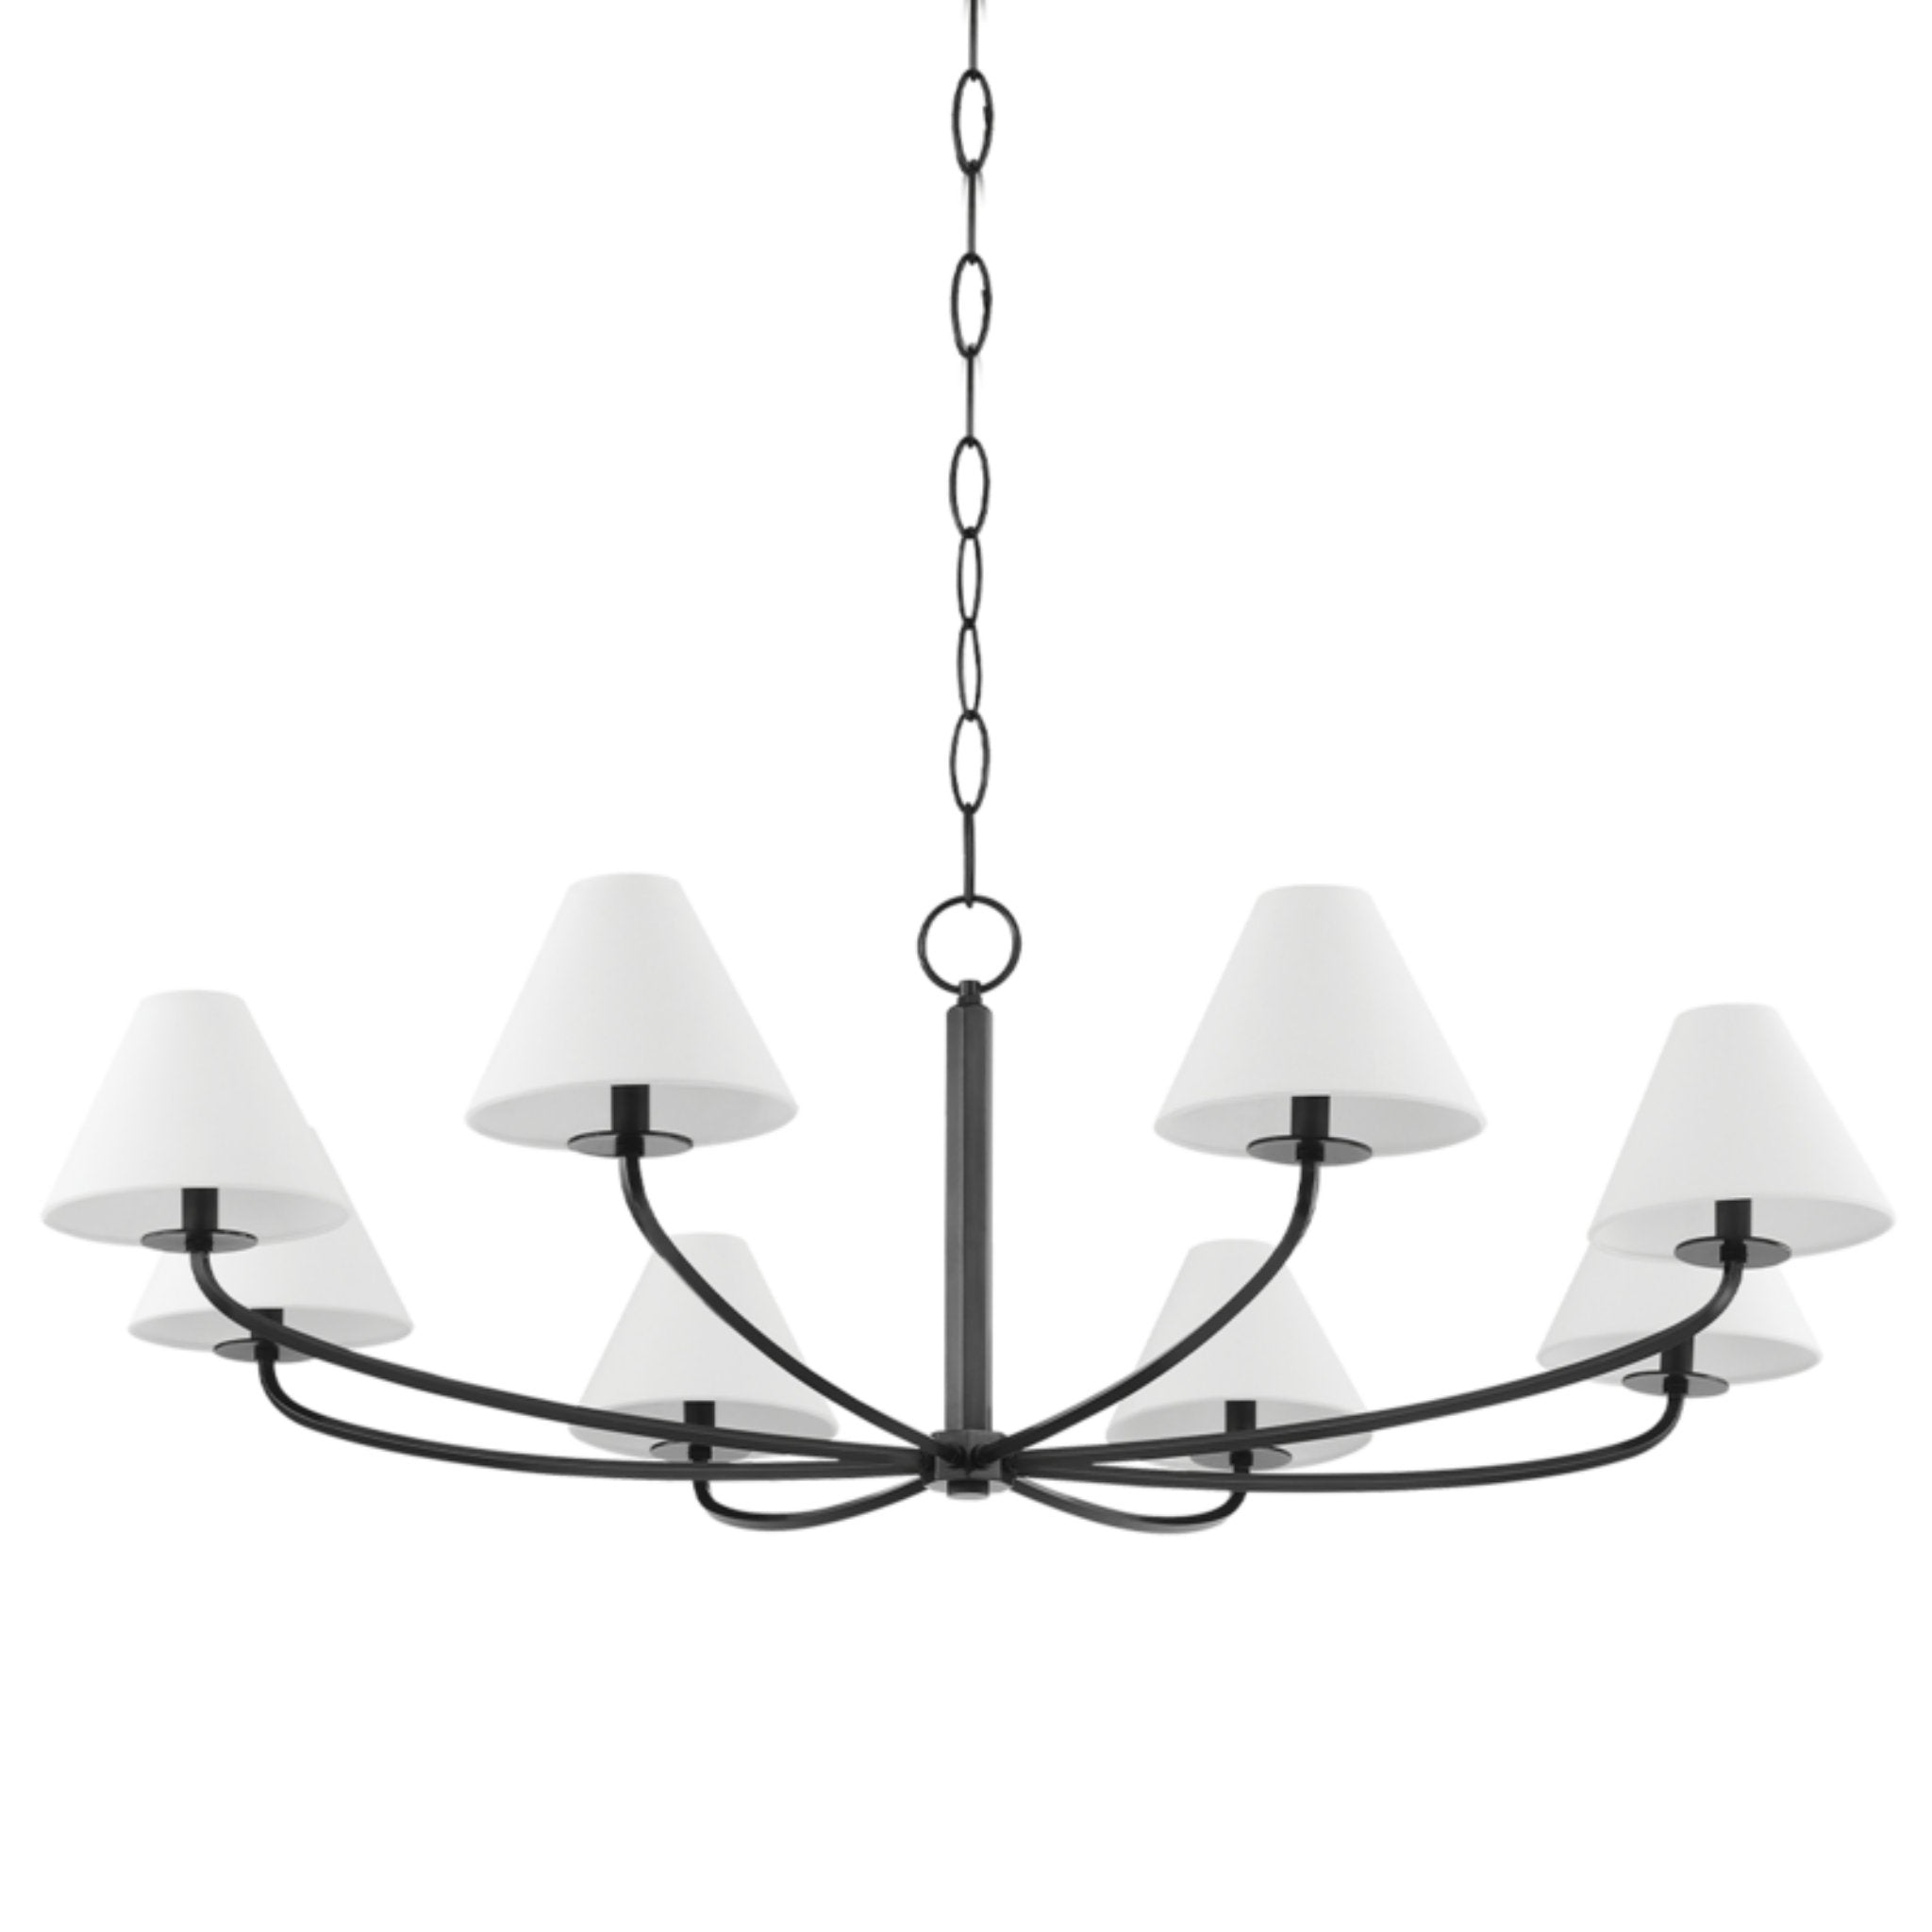 Stacey 8 Light Chandelier in Old Bronze by Becki Owens